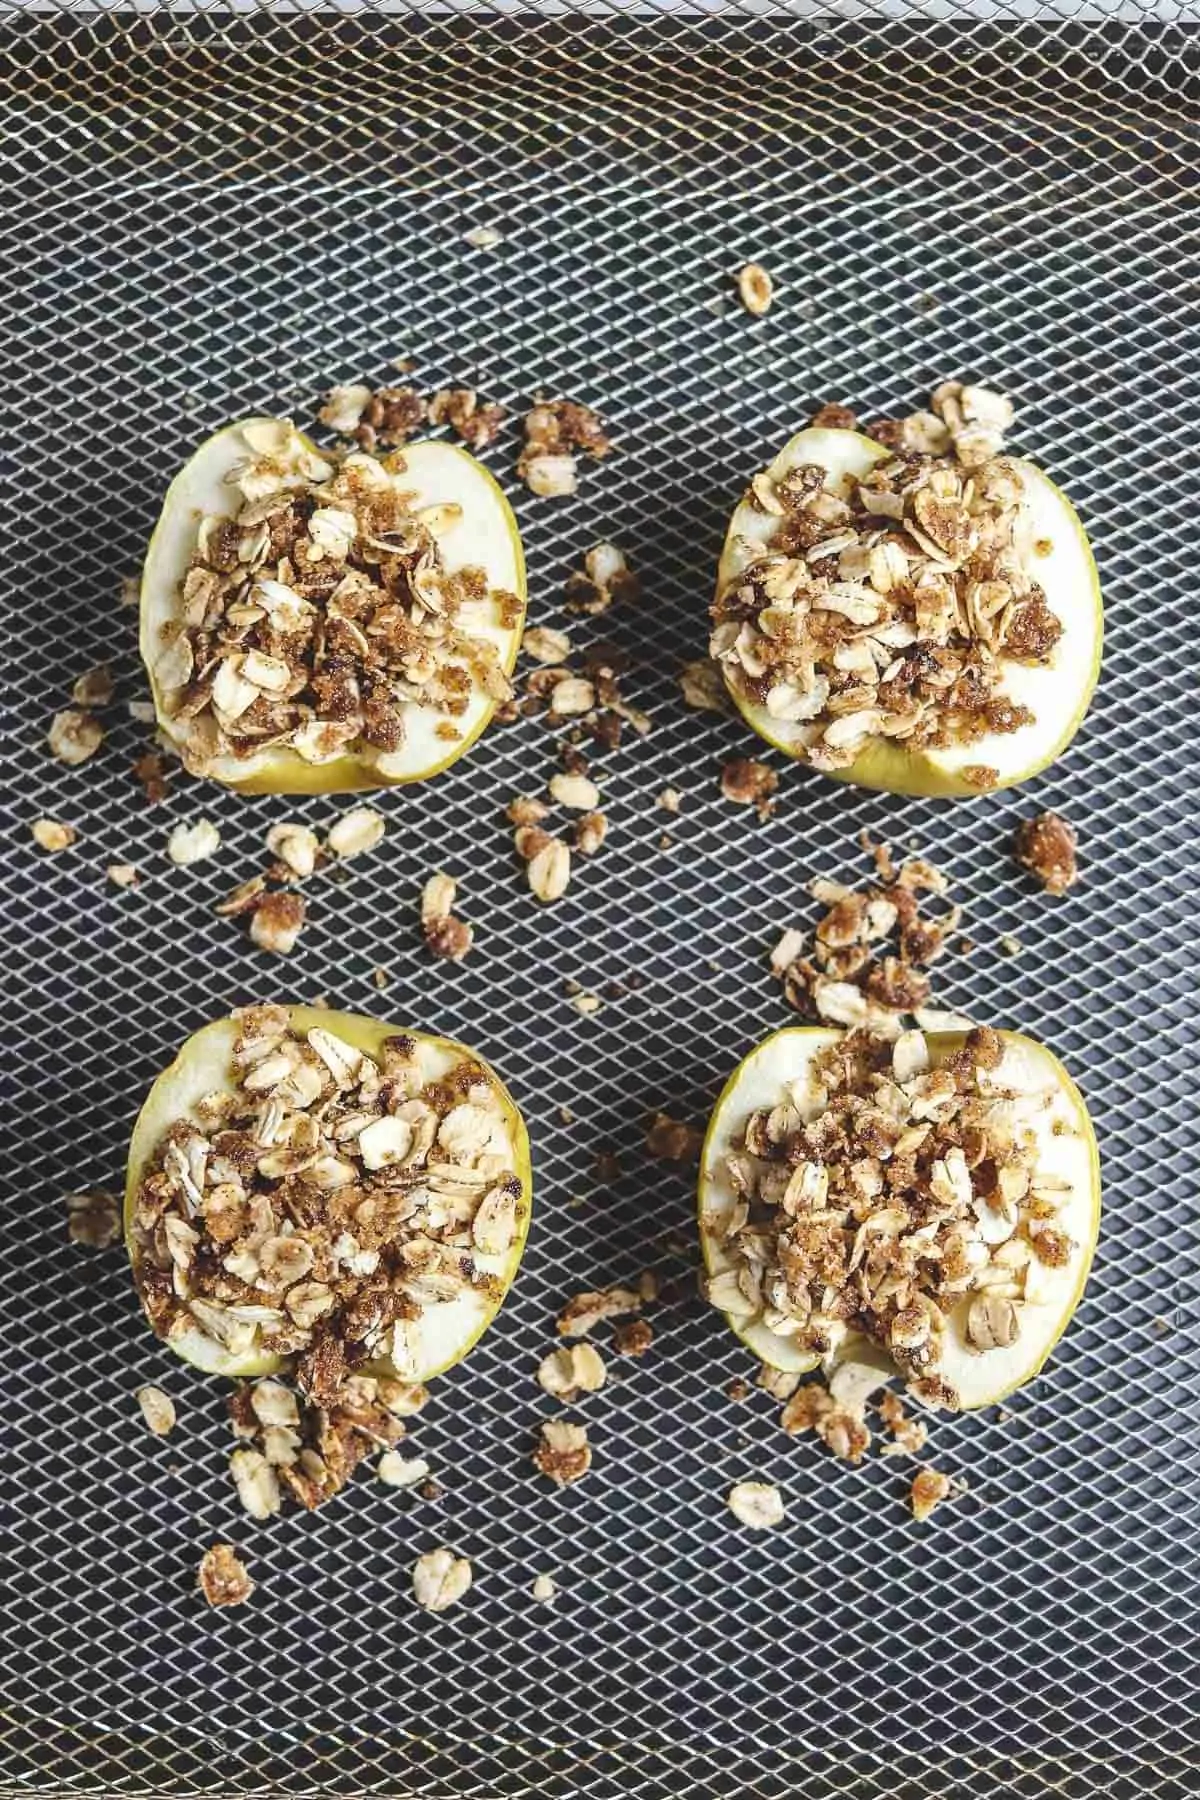 apple halves topped with oat topping in air fryer basket